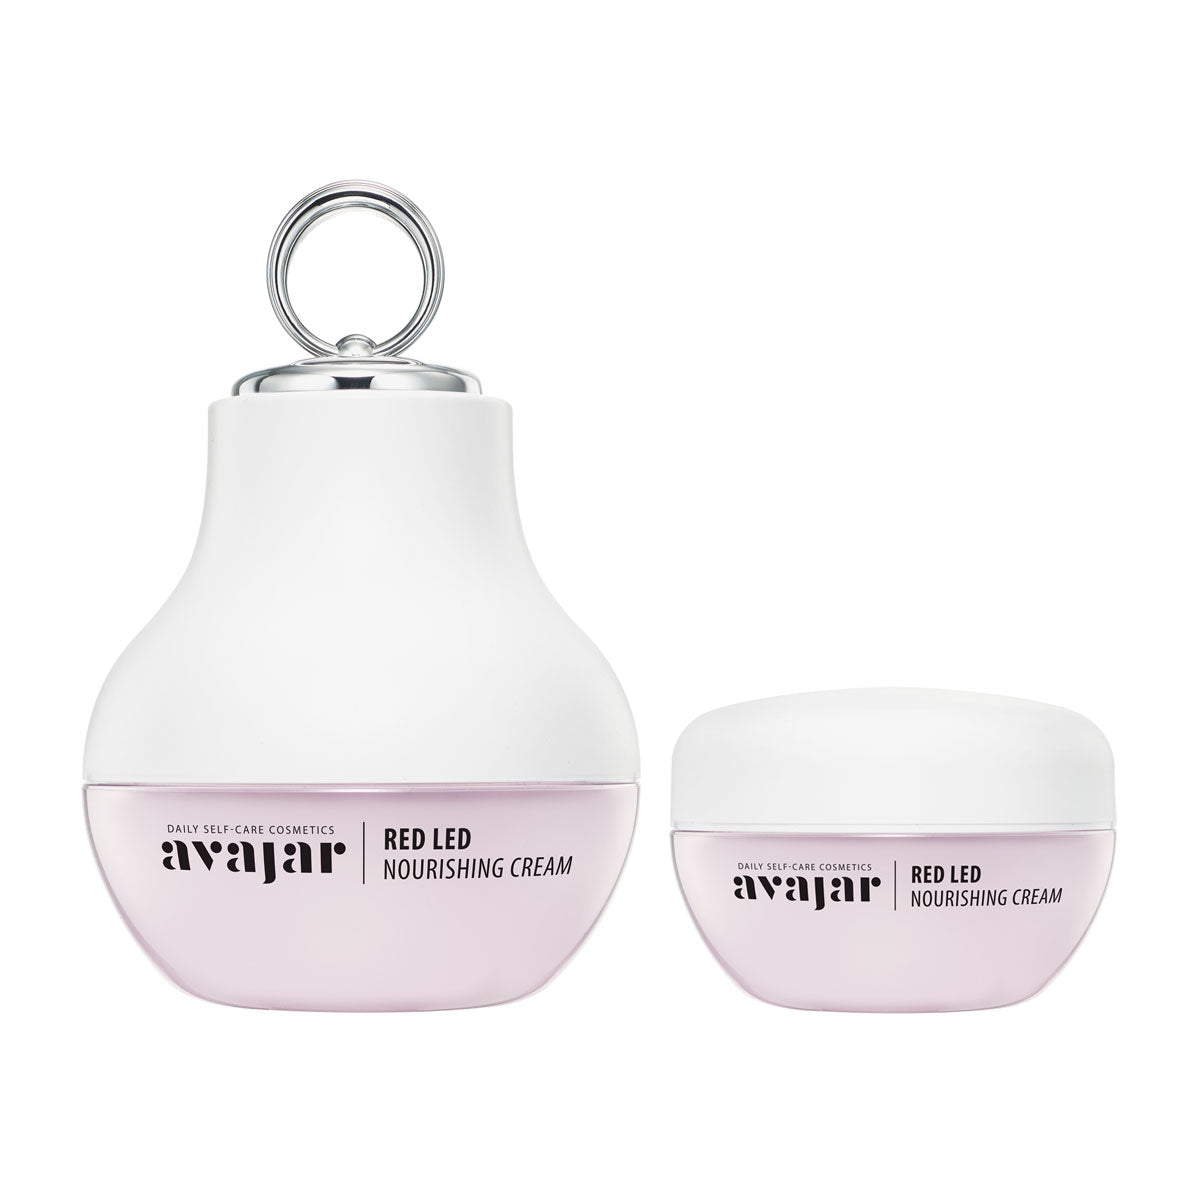 AVAJAR Red LED Nourishing Cream (Special PKG) - with Beauty device - Dotrade Express. Trusted Korea Manufacturers. Find the best Korean Brands